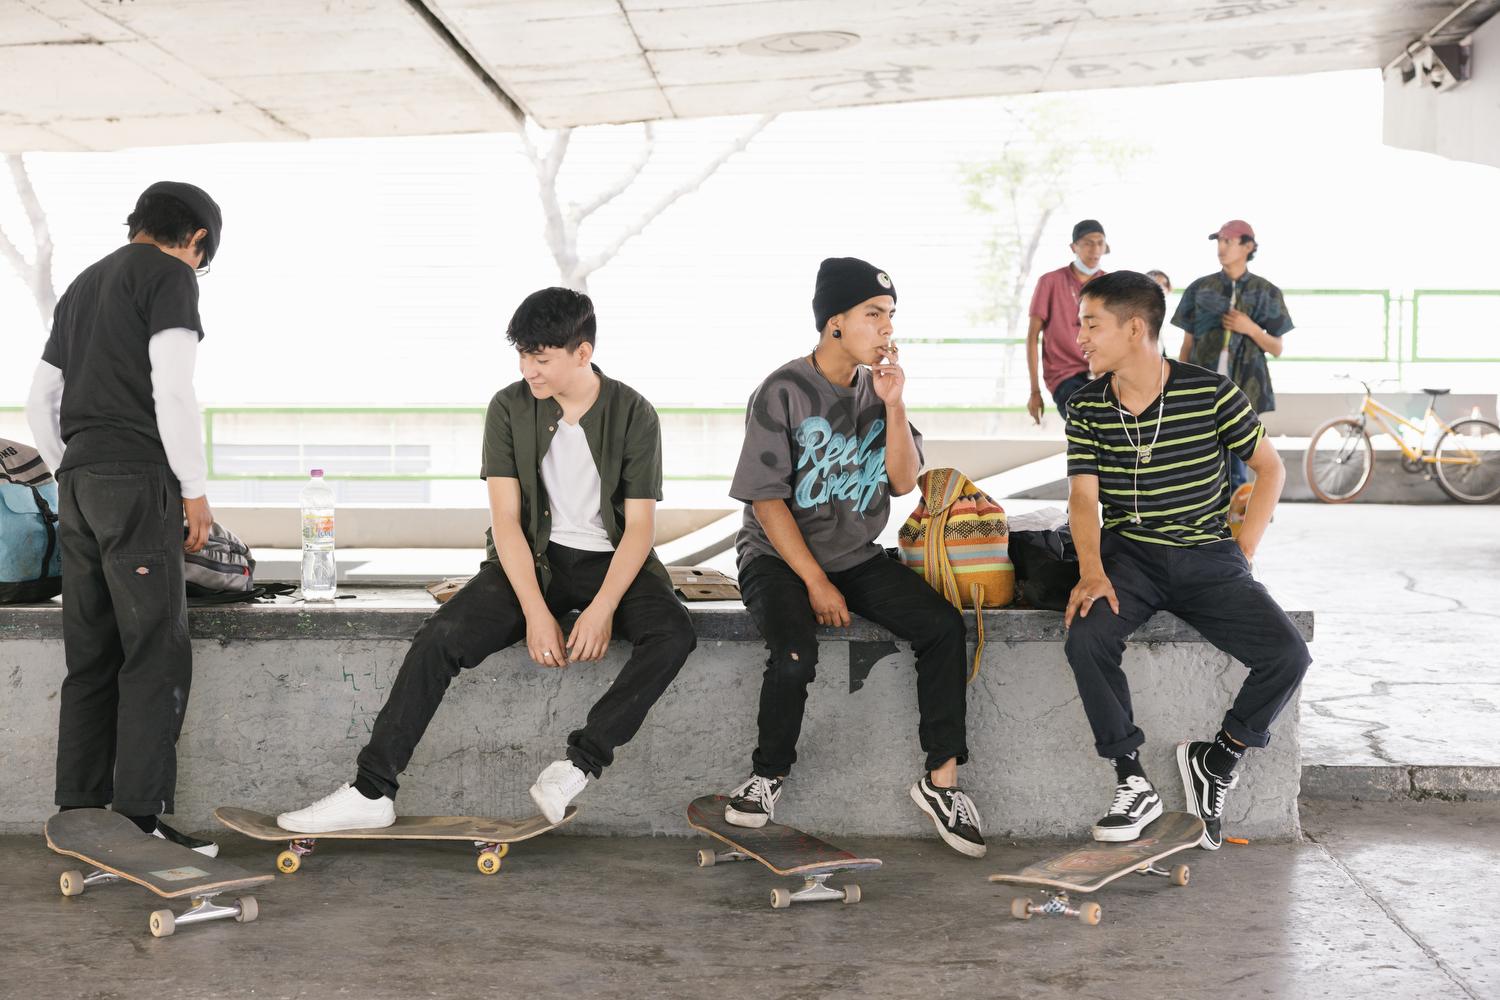 Mexico City, Mexico. January 8, 2021. Skateboarders hang out at Skatepark San Cosme in Mexico...